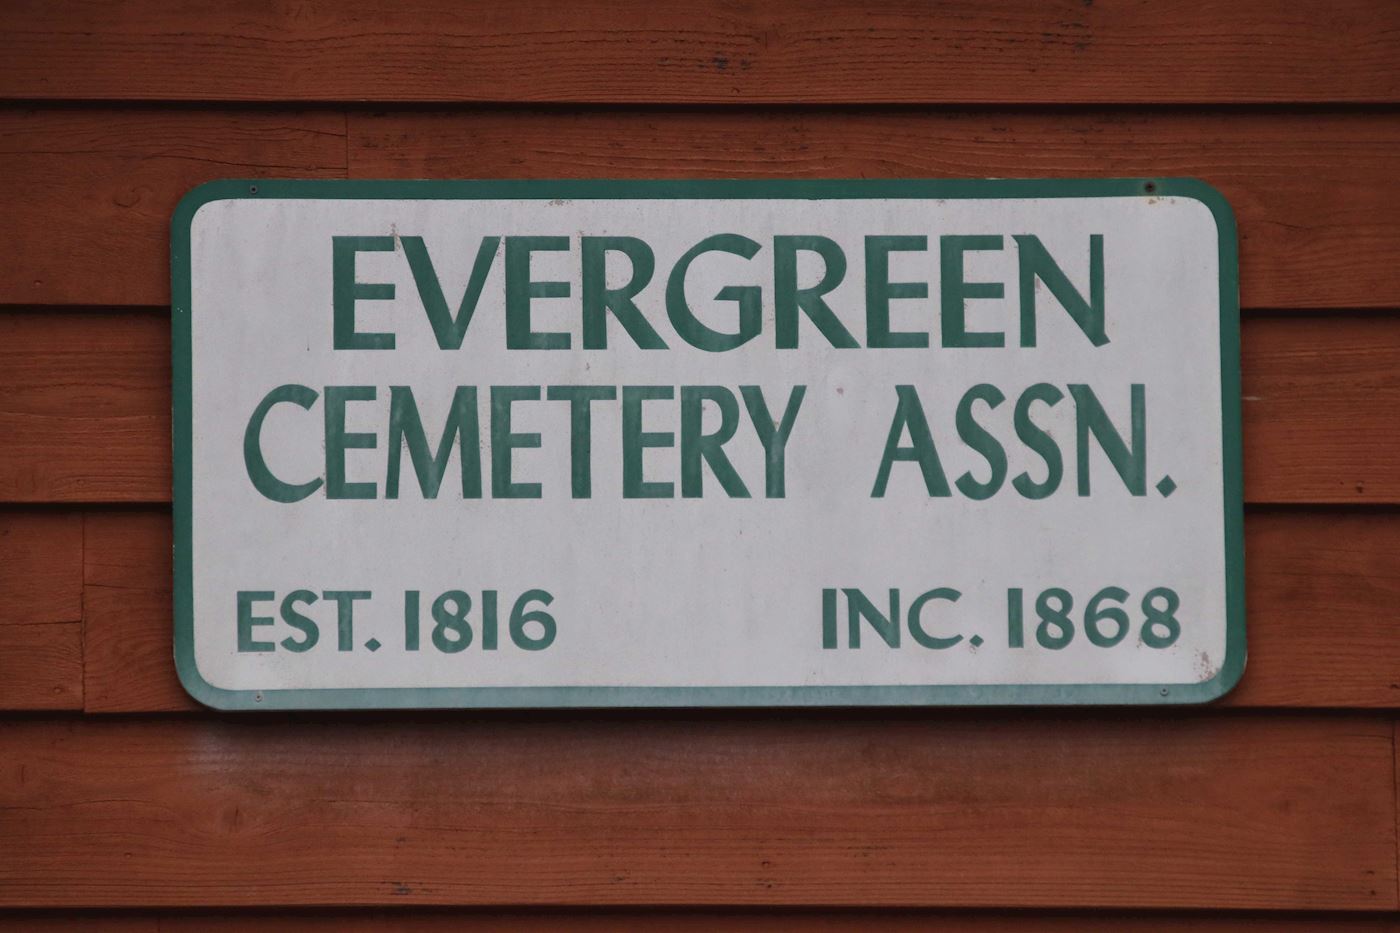 An historic cemetery in the center of Barrington, IL